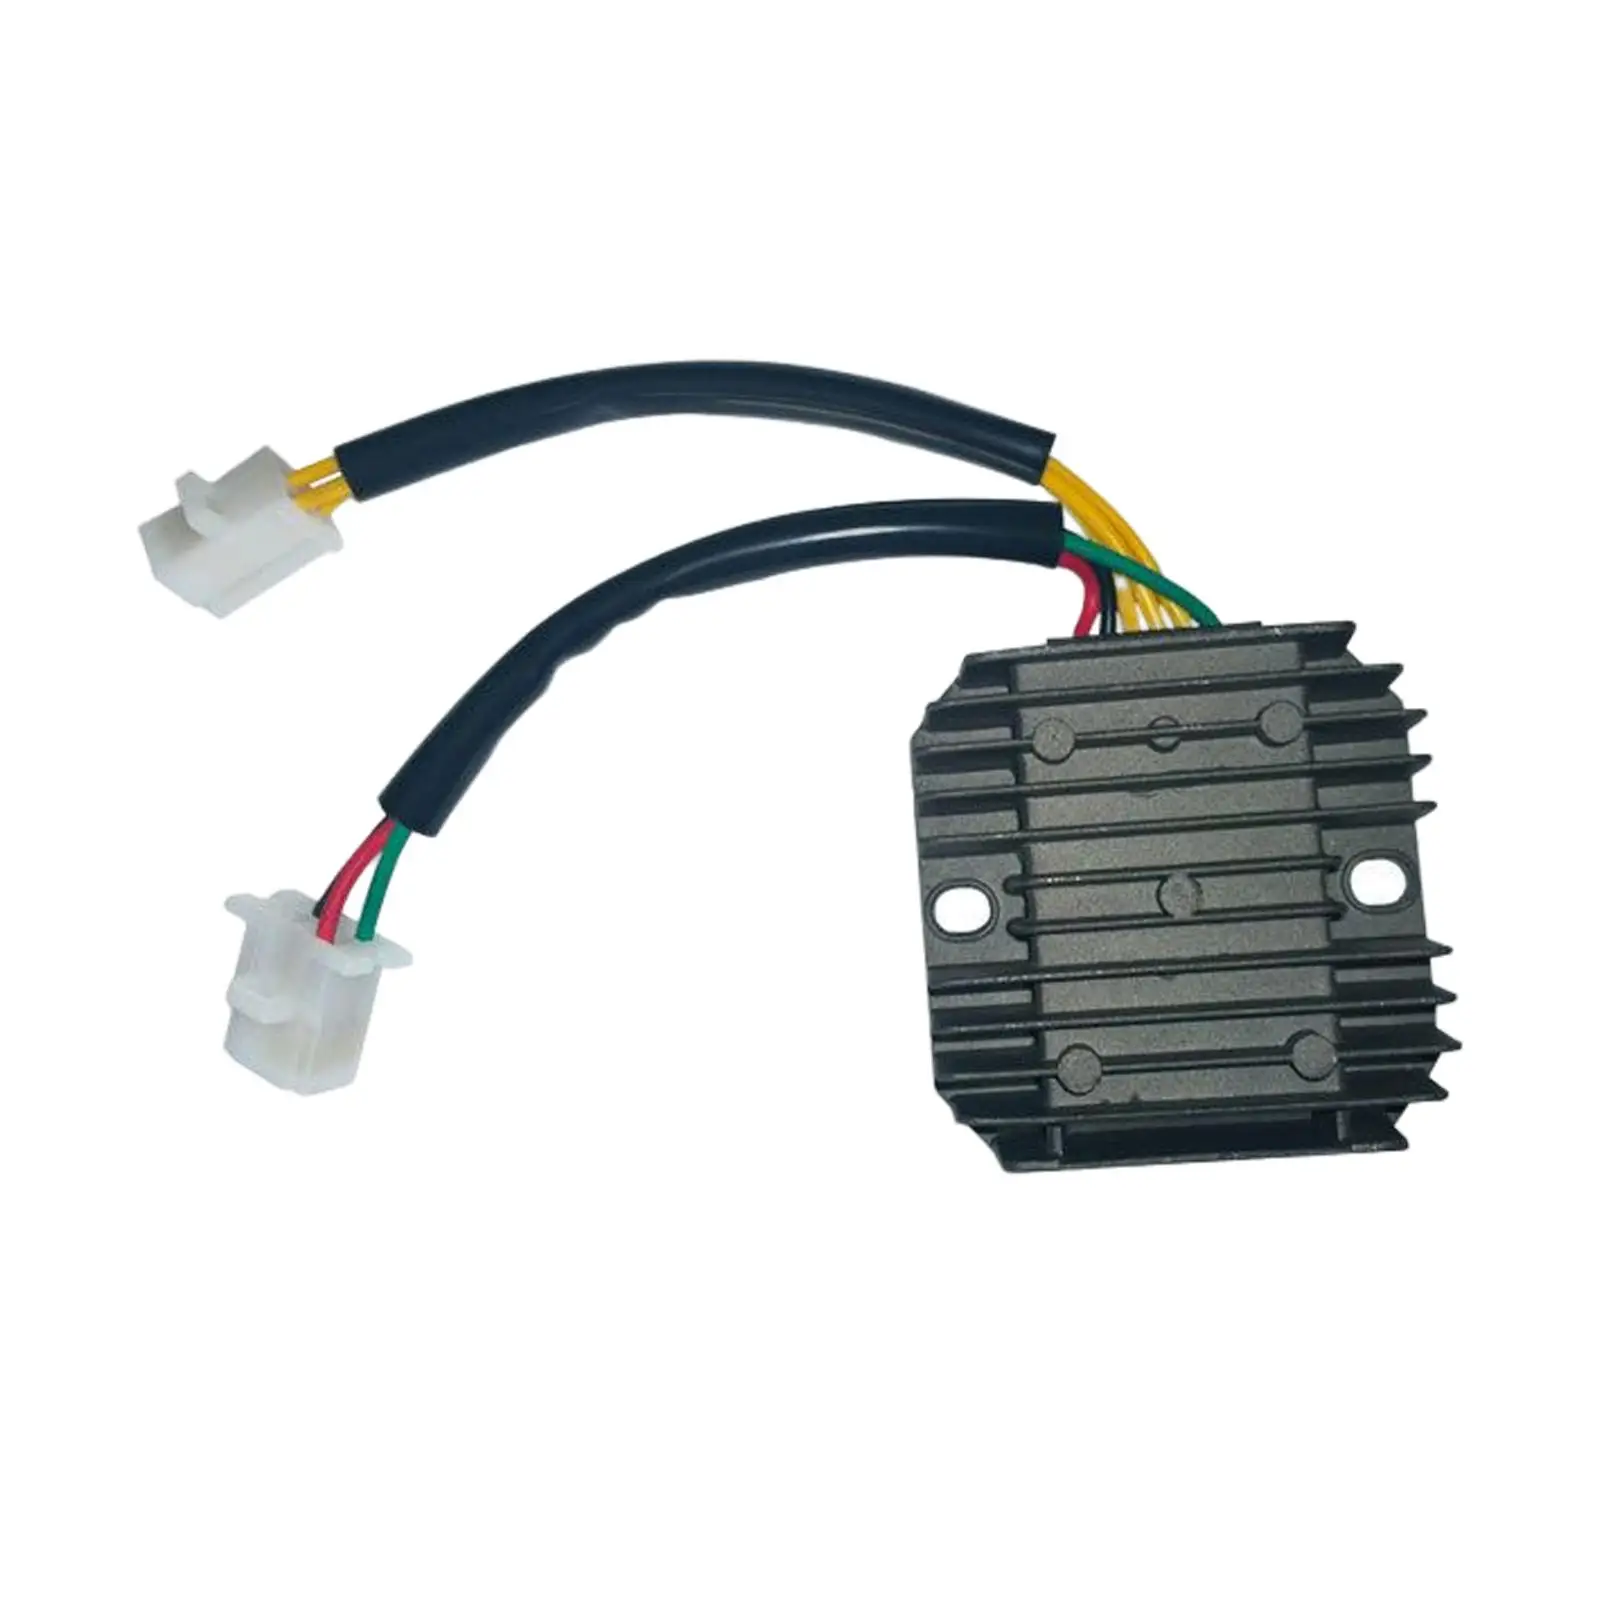 Regulator Motorcycle 6 Wires Dirt Bike for CH150 CN250 CH 125 1986-2001